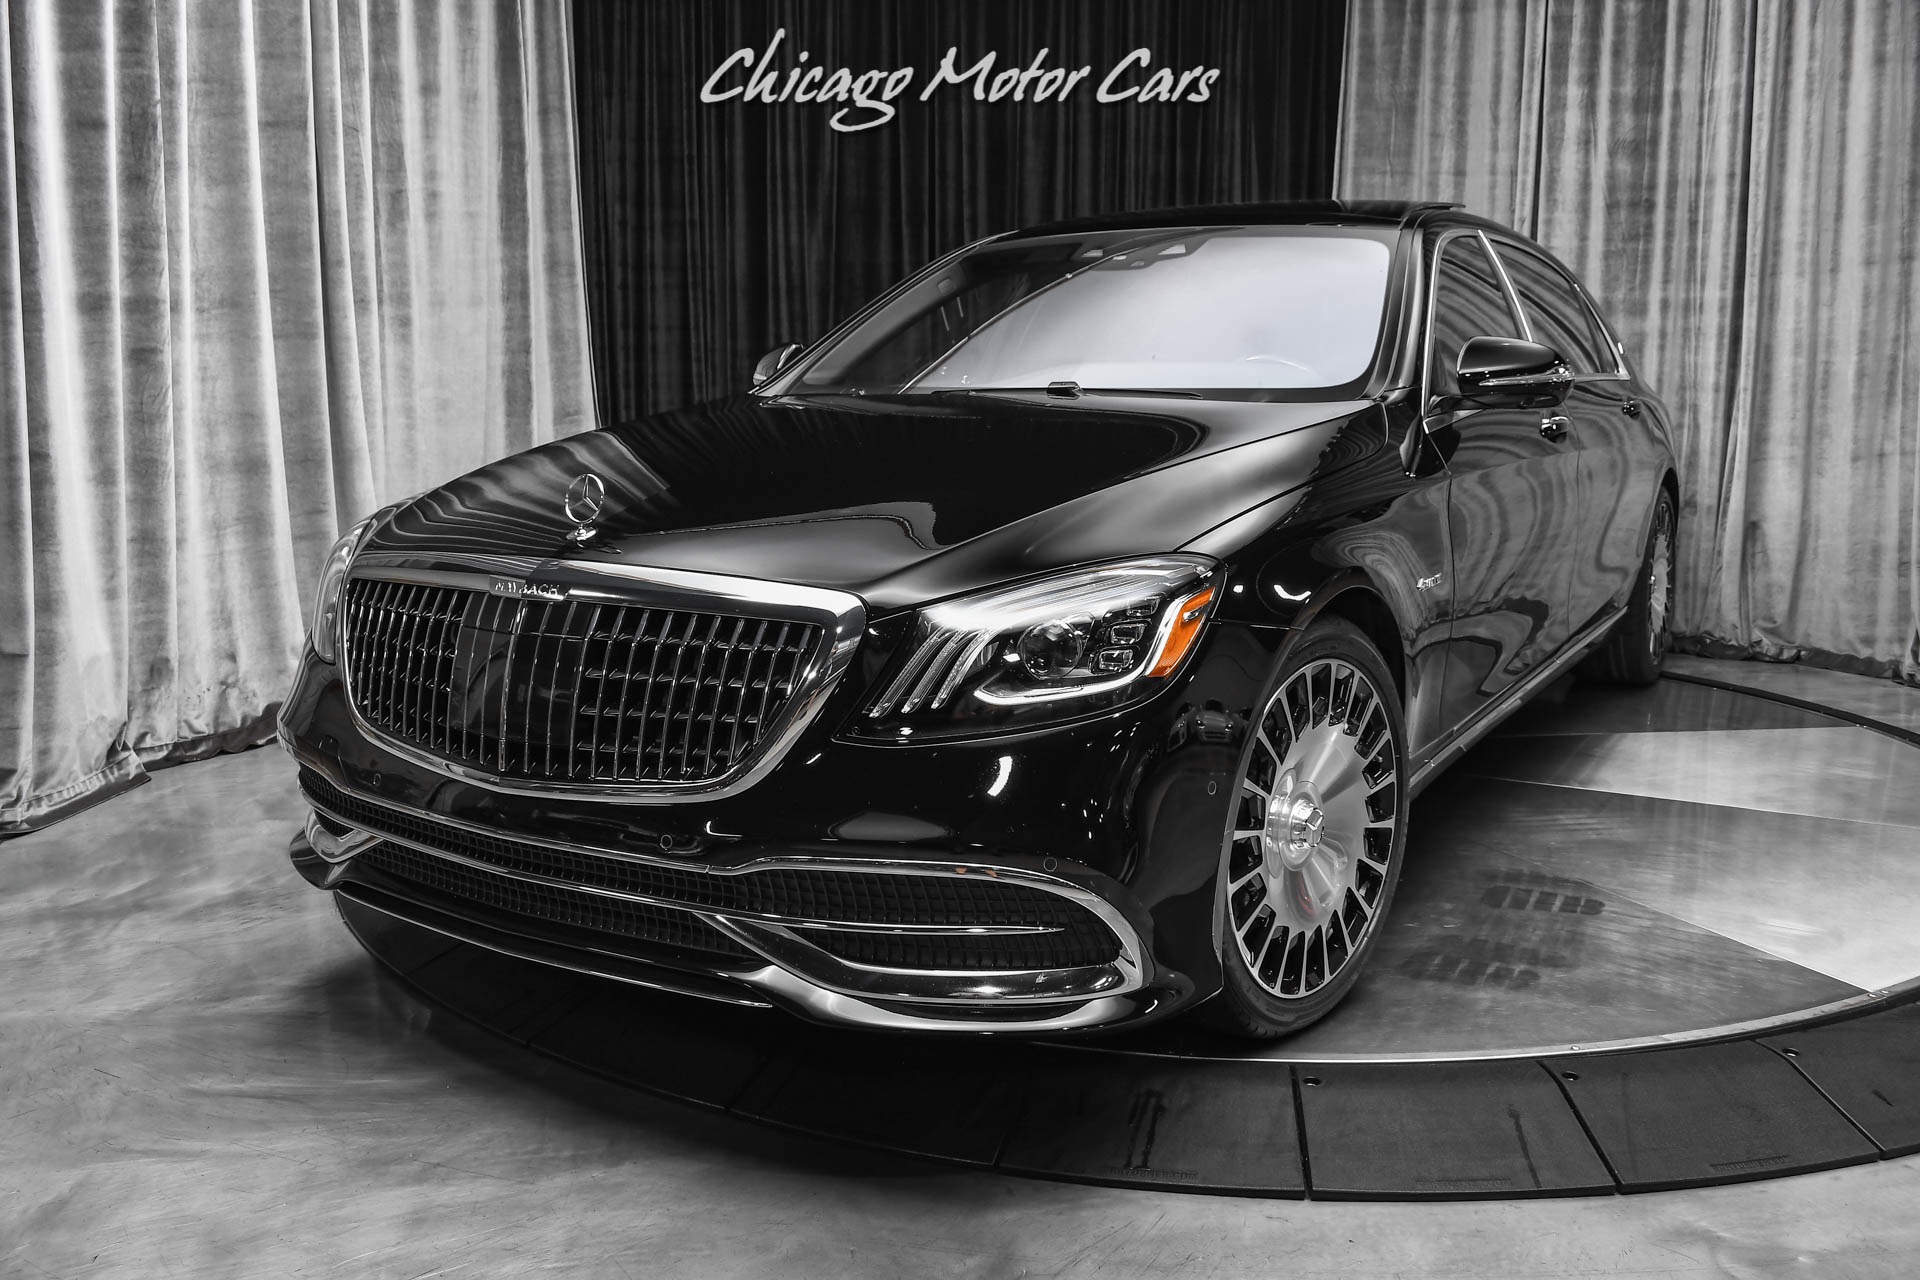 Used 2020 Mercedes-Benz S560 Maybach Mercedes-Maybach S 560 4MATIC For Sale  (Special Pricing) | Chicago Motor Cars Stock #18635